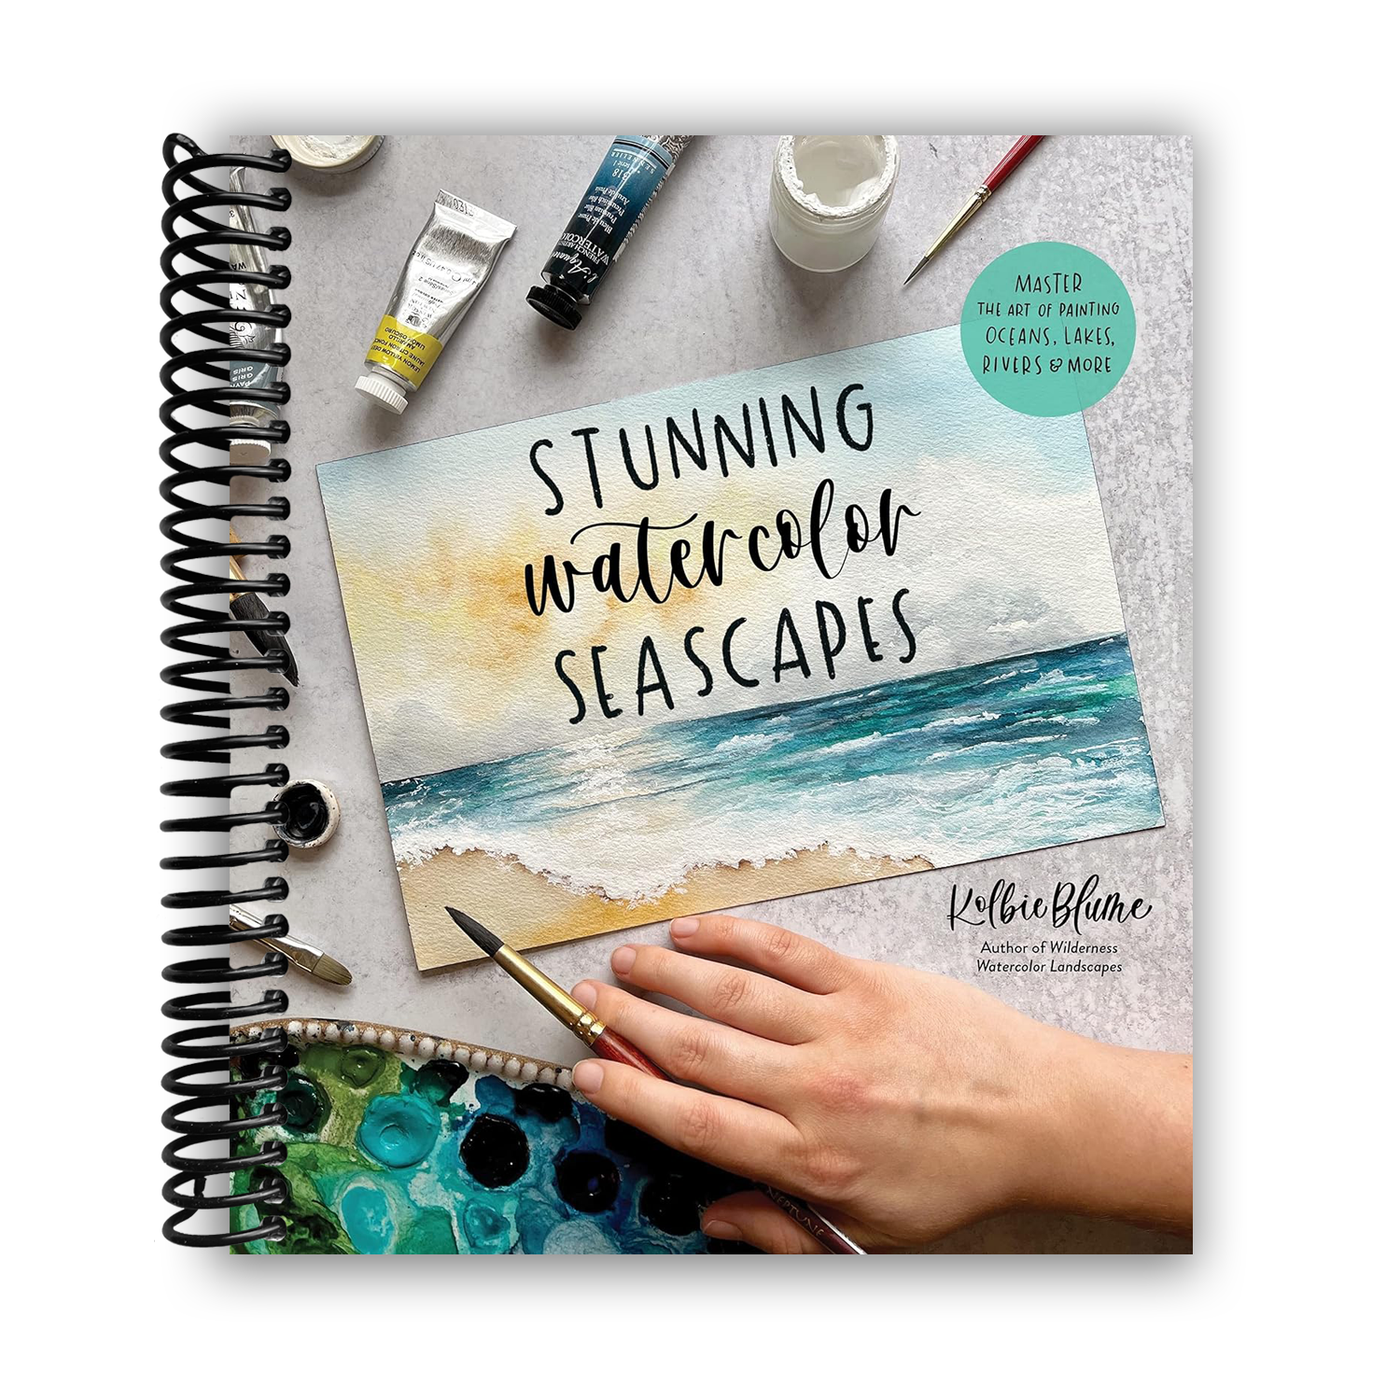 Stunning Watercolor Seascapes: Master the Art of Painting Oceans, Rivers, Lakes and More (Spiral Bound)